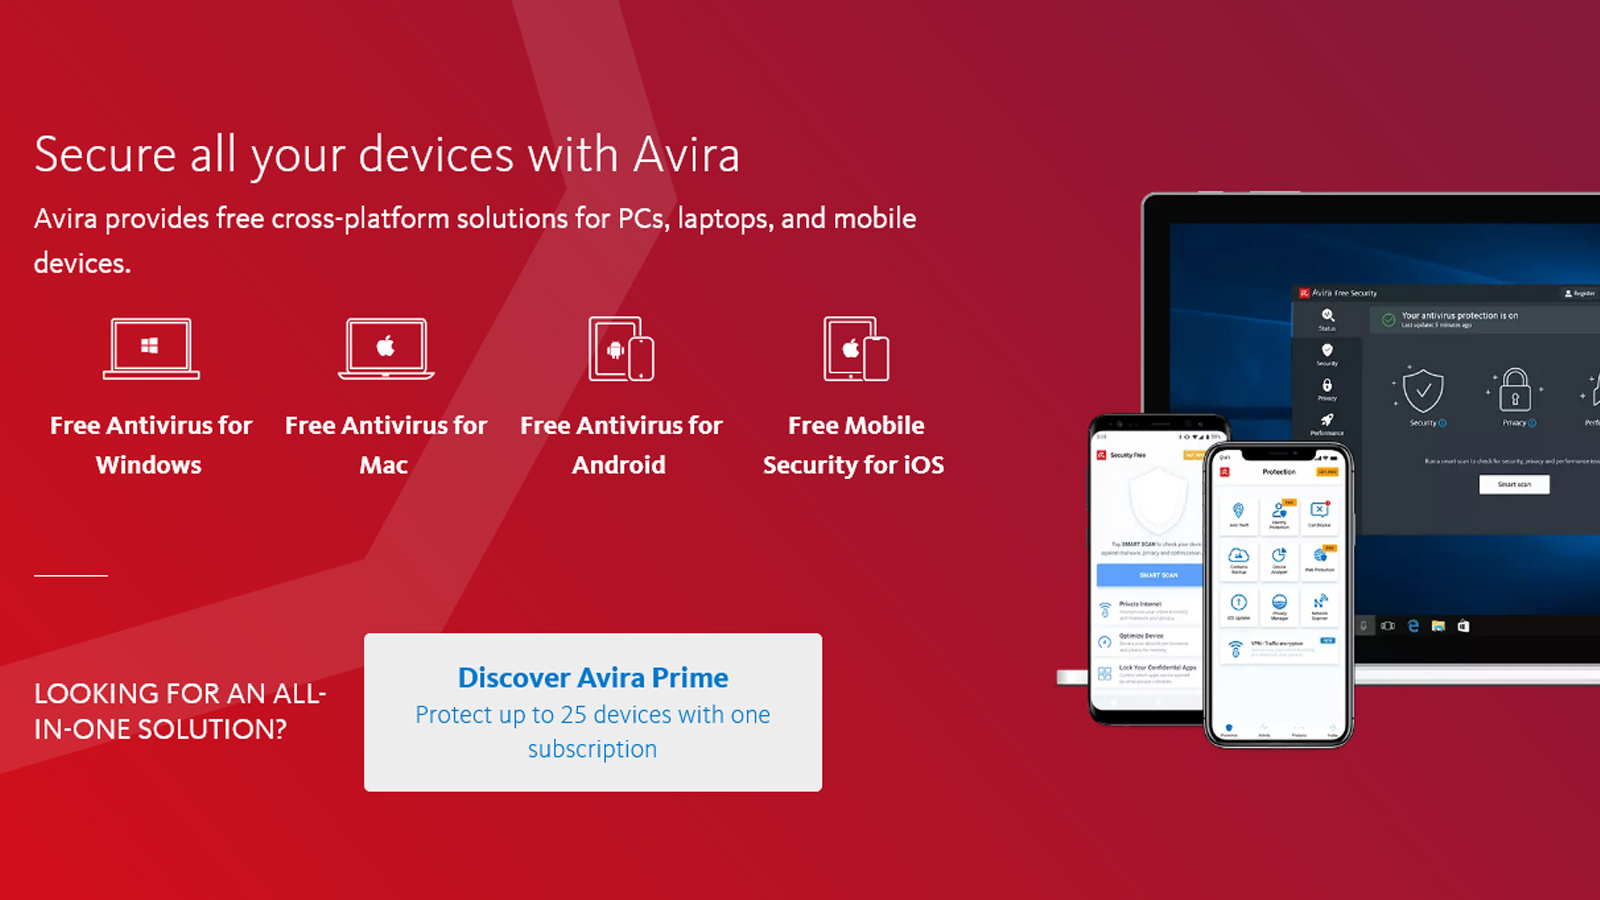 Get feedback from a vast remote working audience about Avira